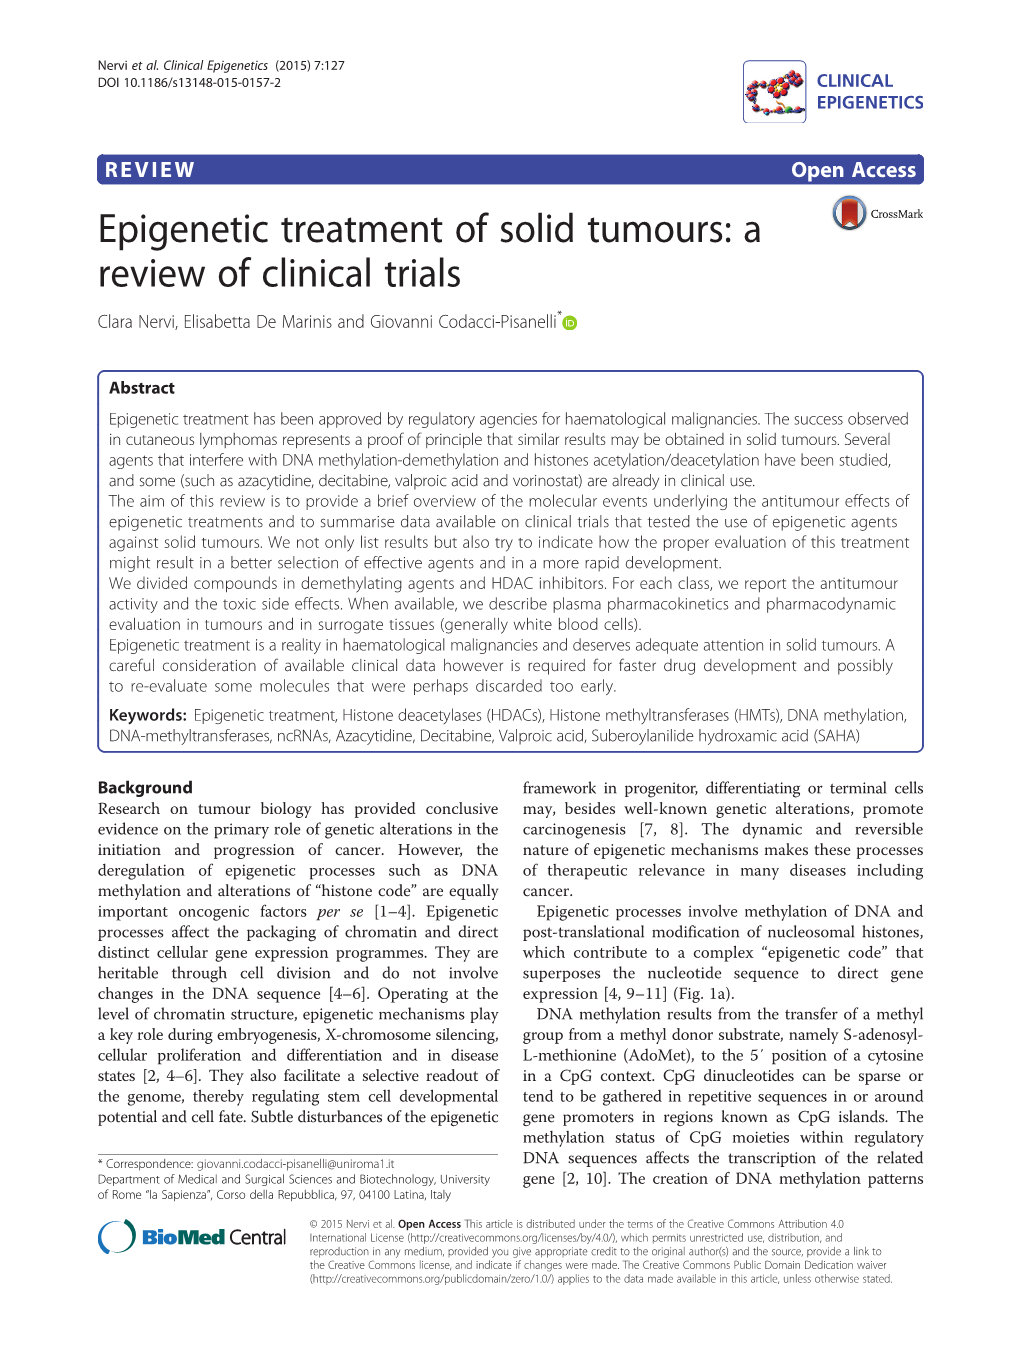 Epigenetic Treatment of Solid Tumours: a Review of Clinical Trials Clara Nervi, Elisabetta De Marinis and Giovanni Codacci-Pisanelli*